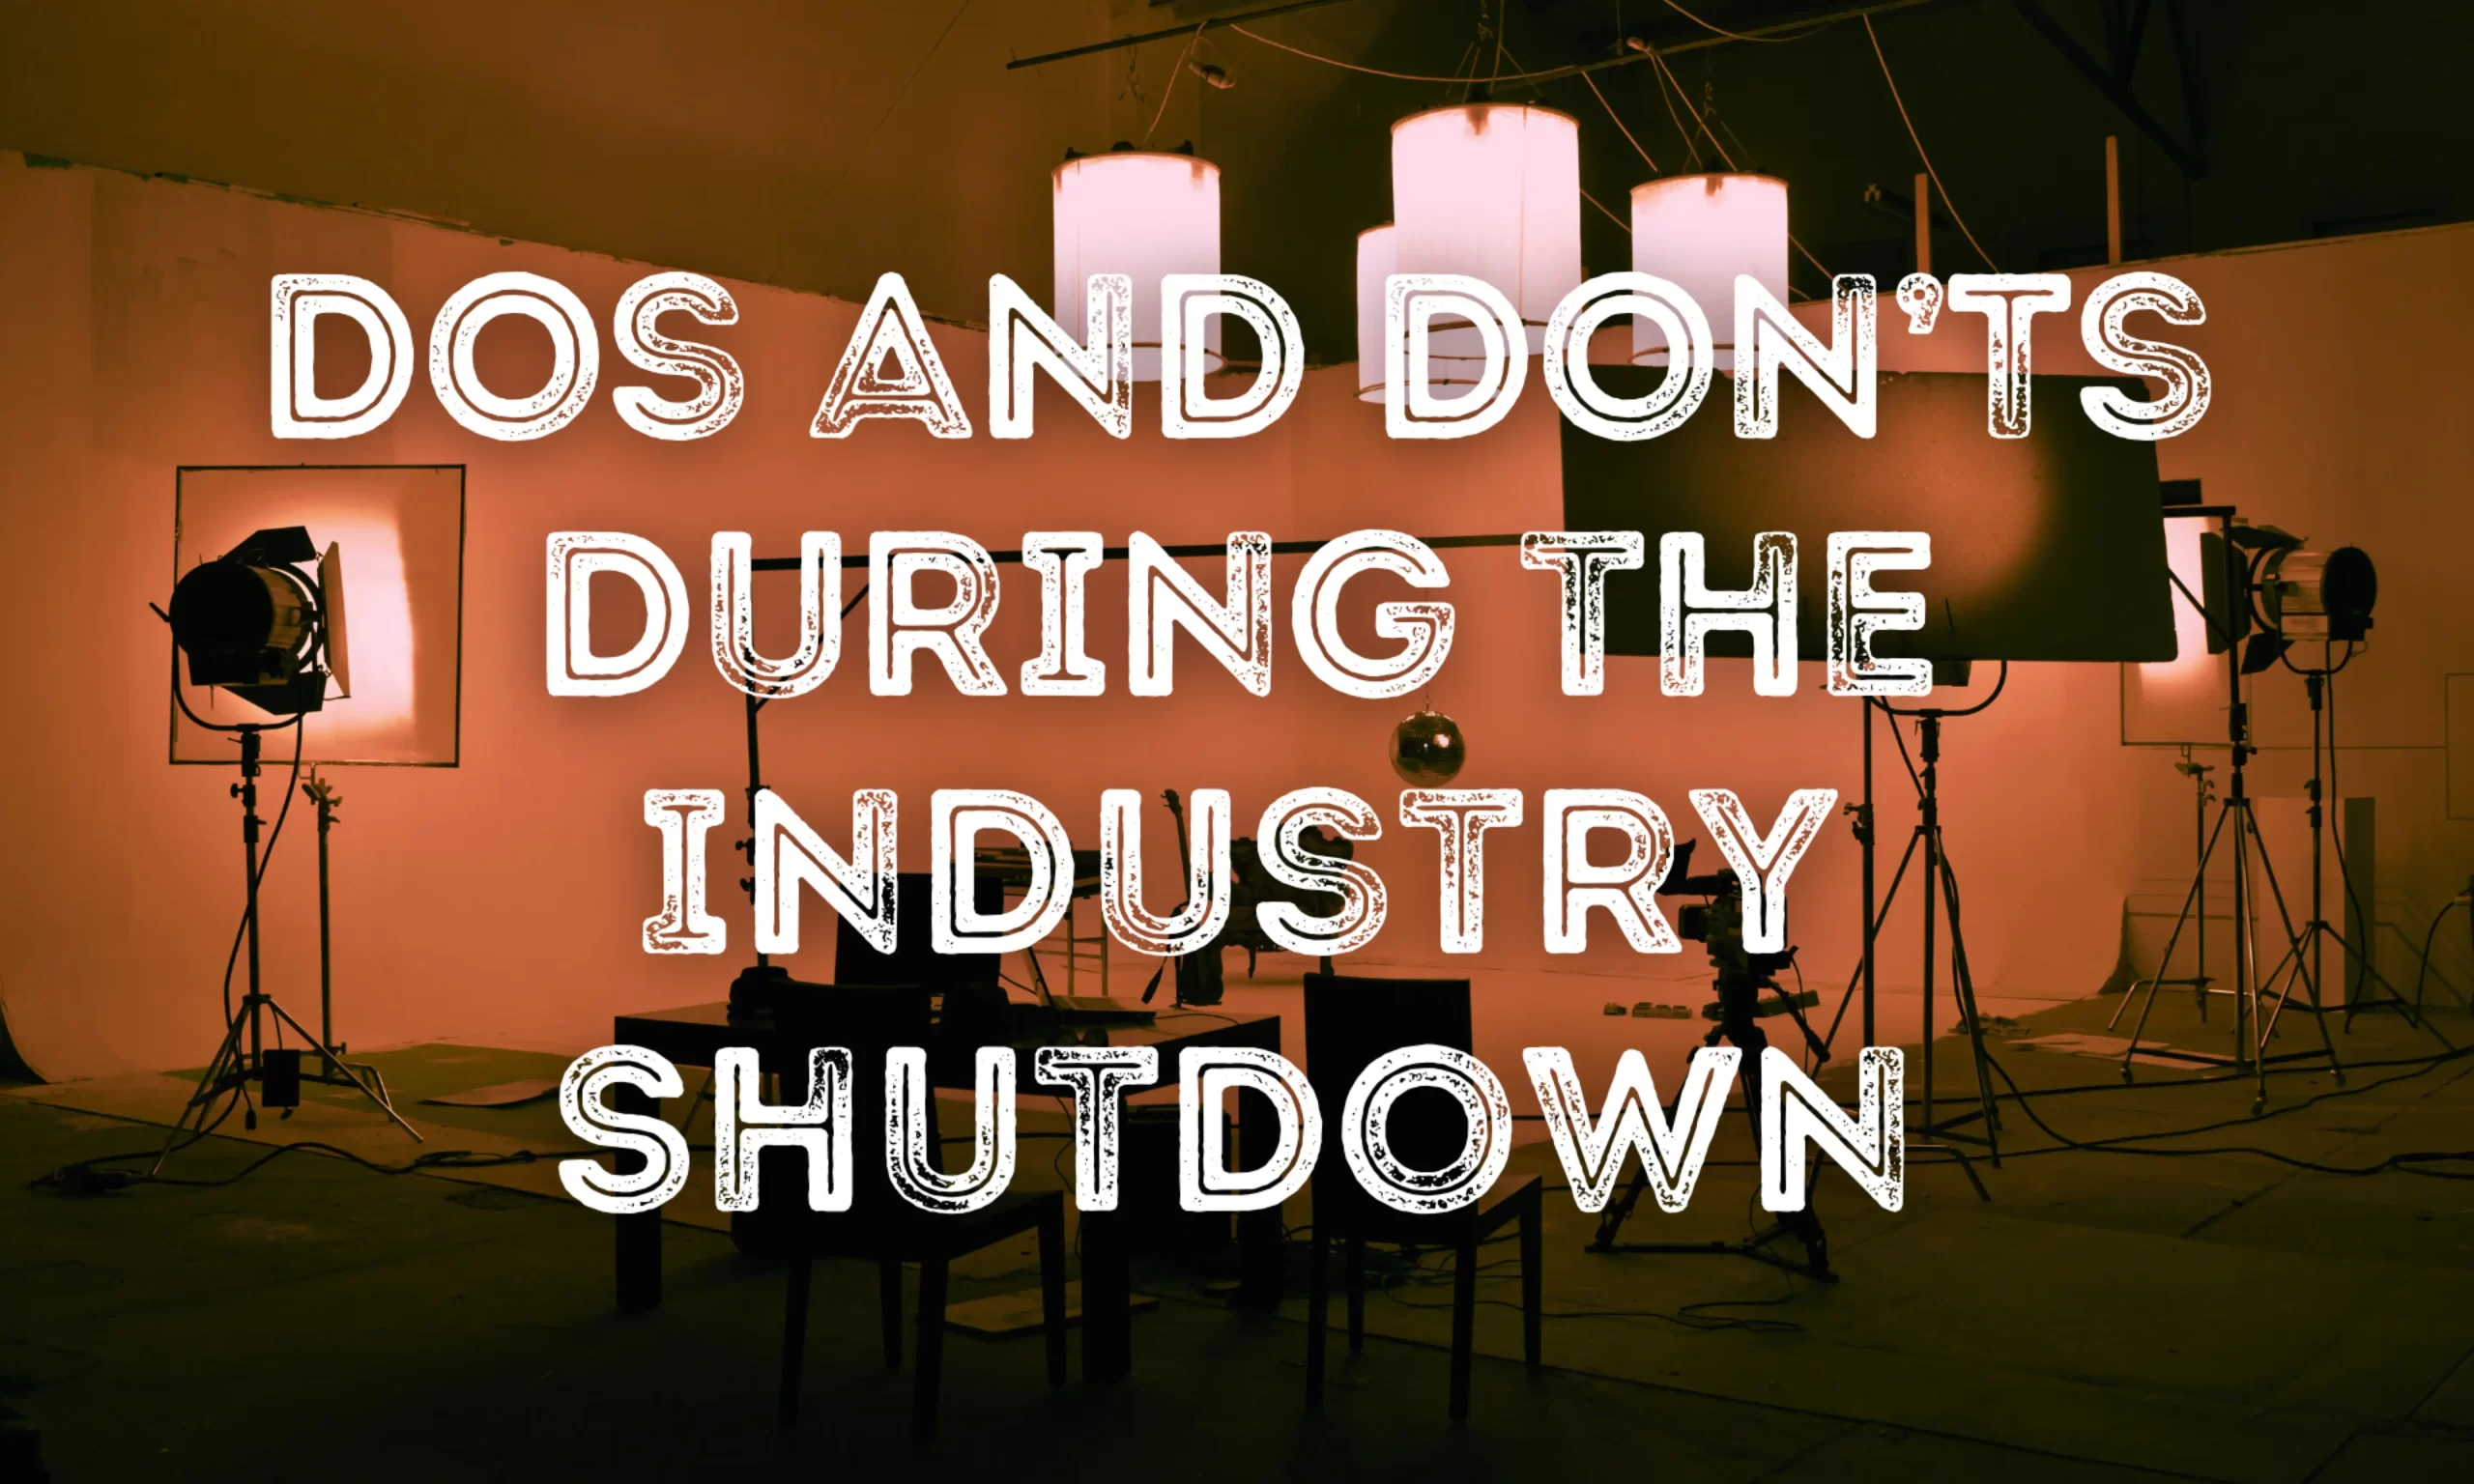 DOs and DON’Ts During the Industry Shutdown